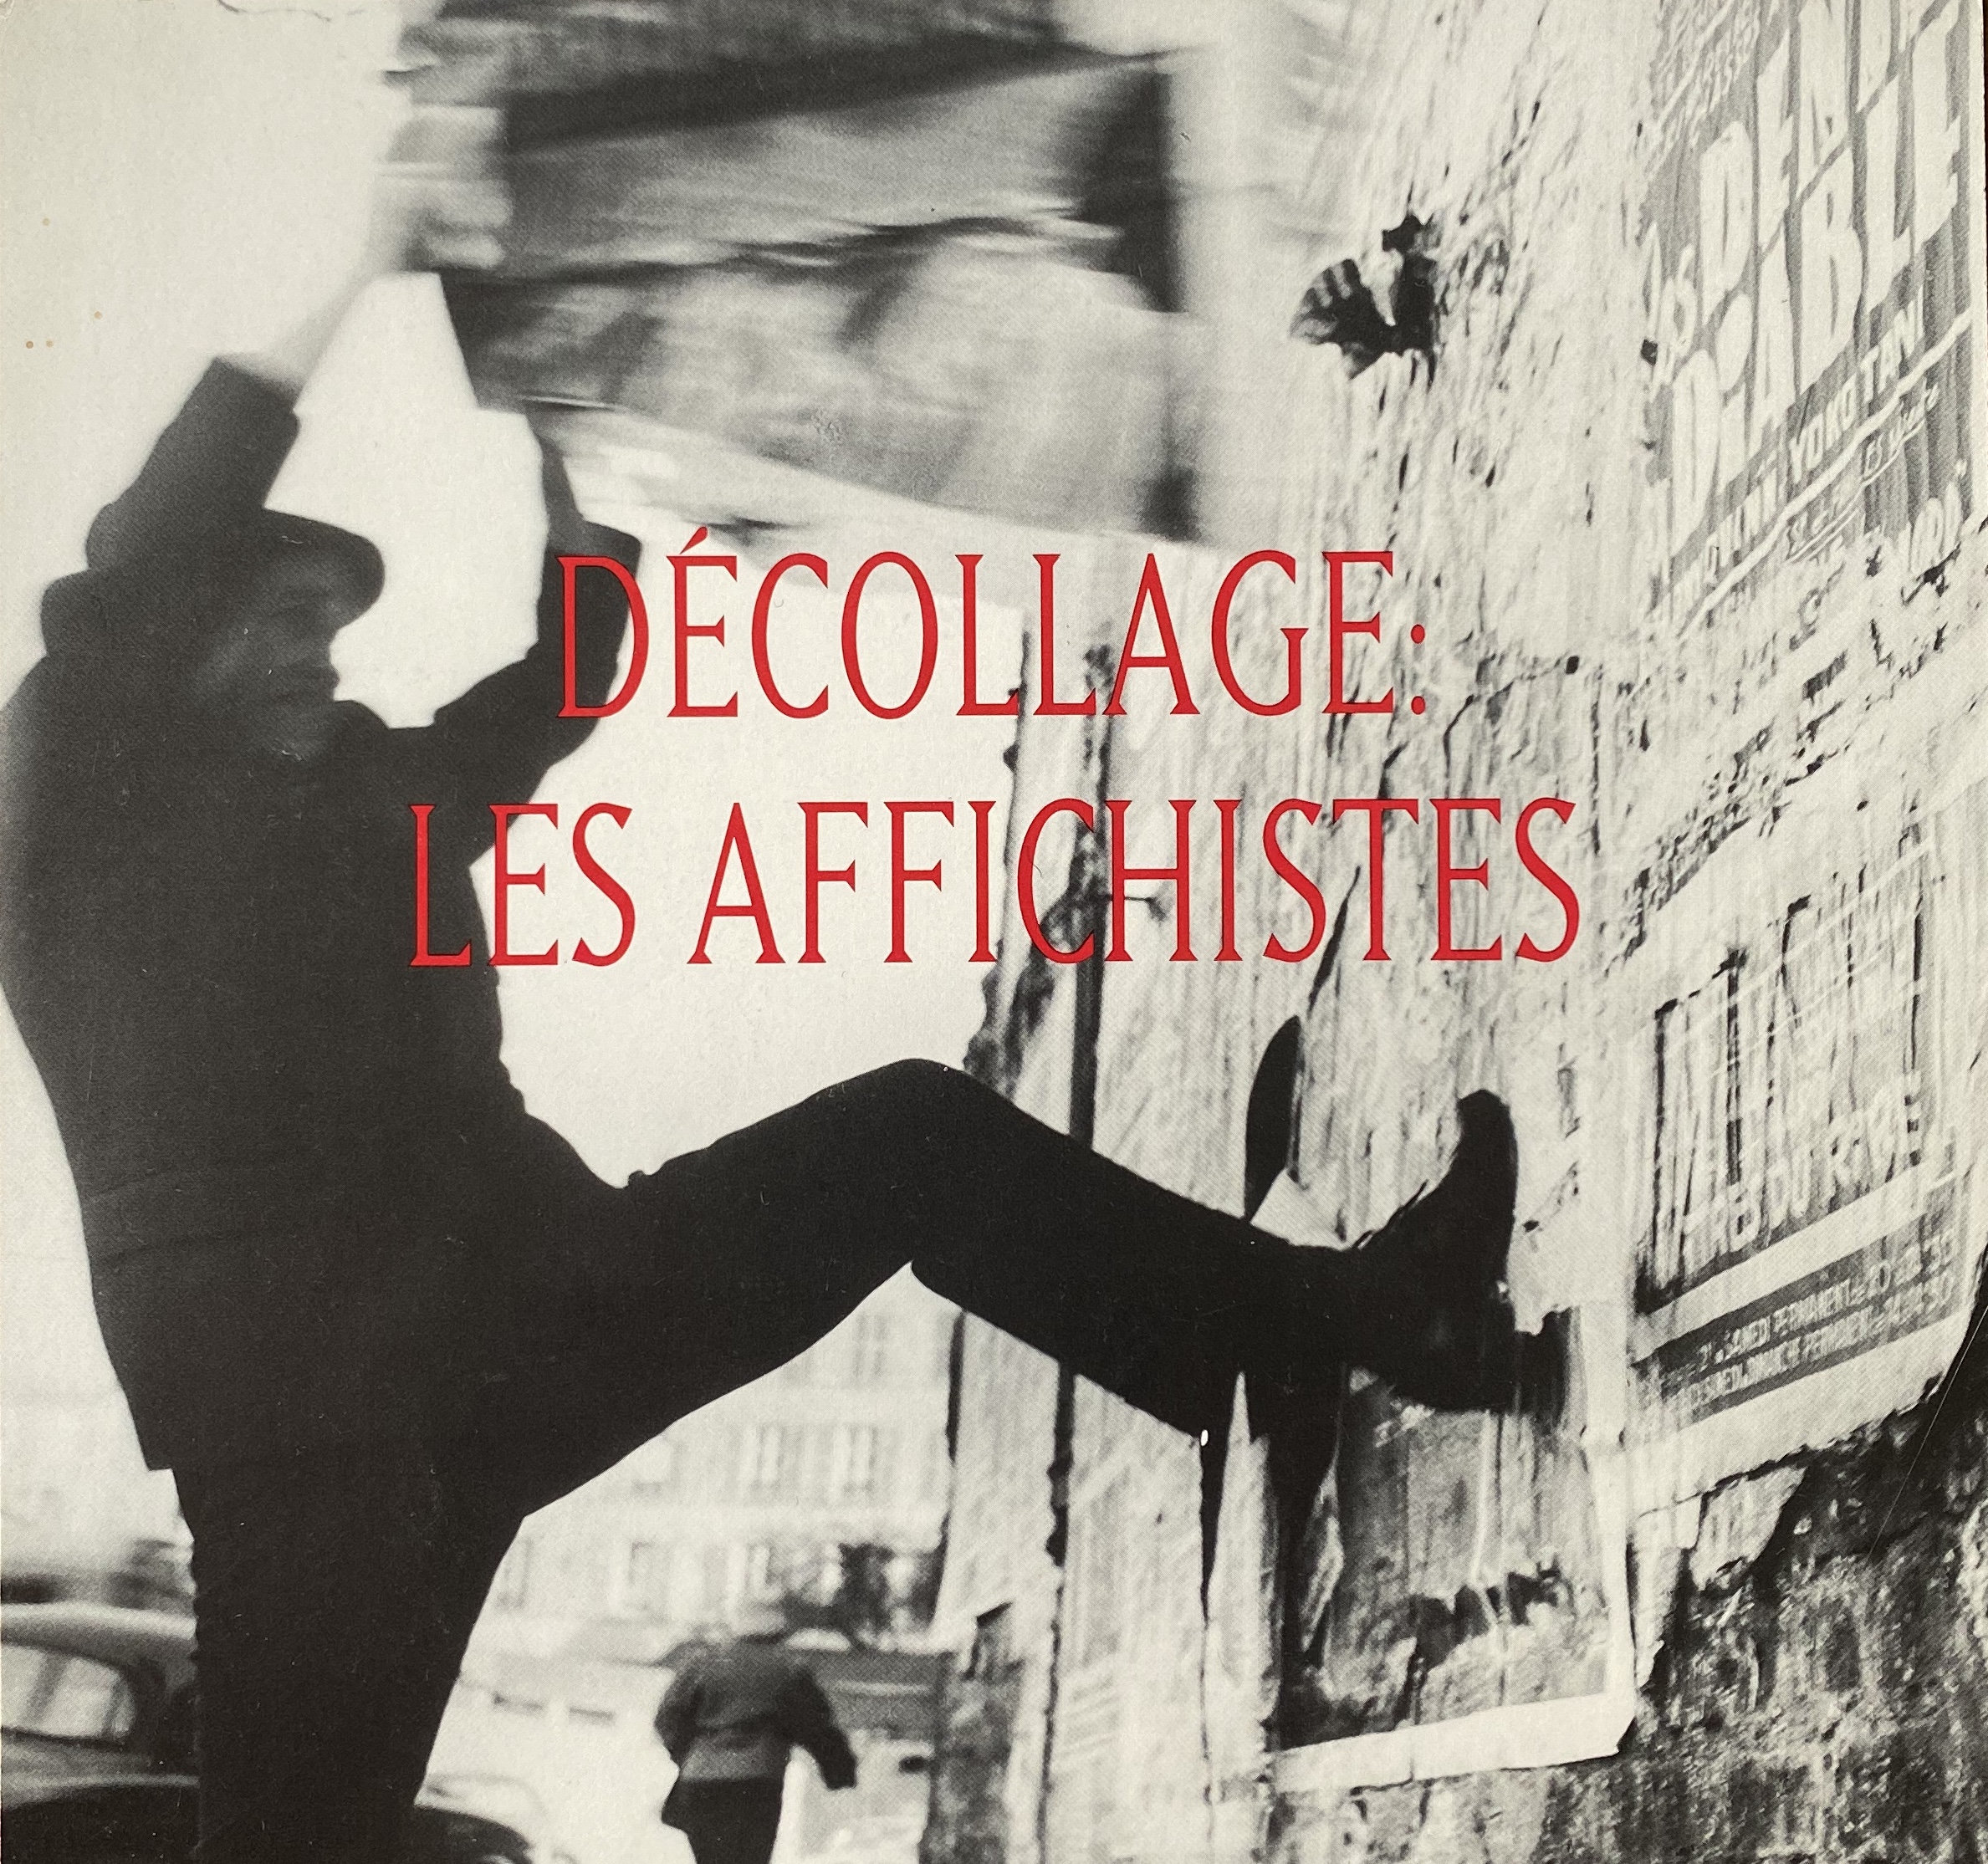 Décollage: Les Affichistes. Works of the 1950s and 60s by Jacques 